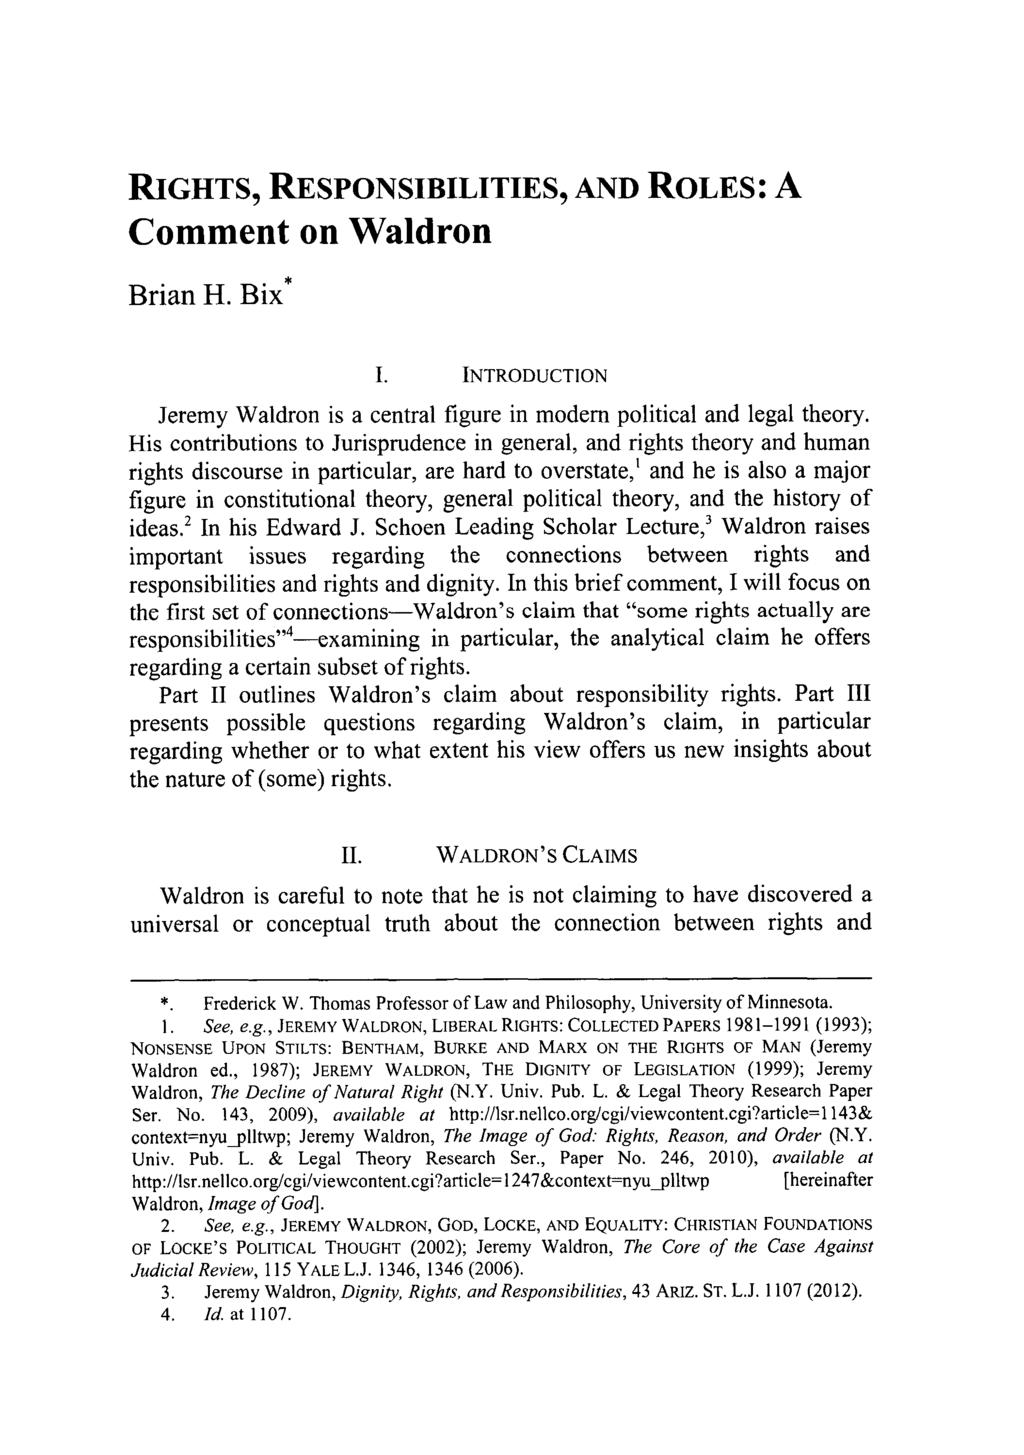 RIGHTS, RESPONSIBILITIES, AND ROLES: A Comment on Waldron Brian H. Bix* I. INTRODUCTION Jeremy Waldron is a central figure in modem political and legal theory.